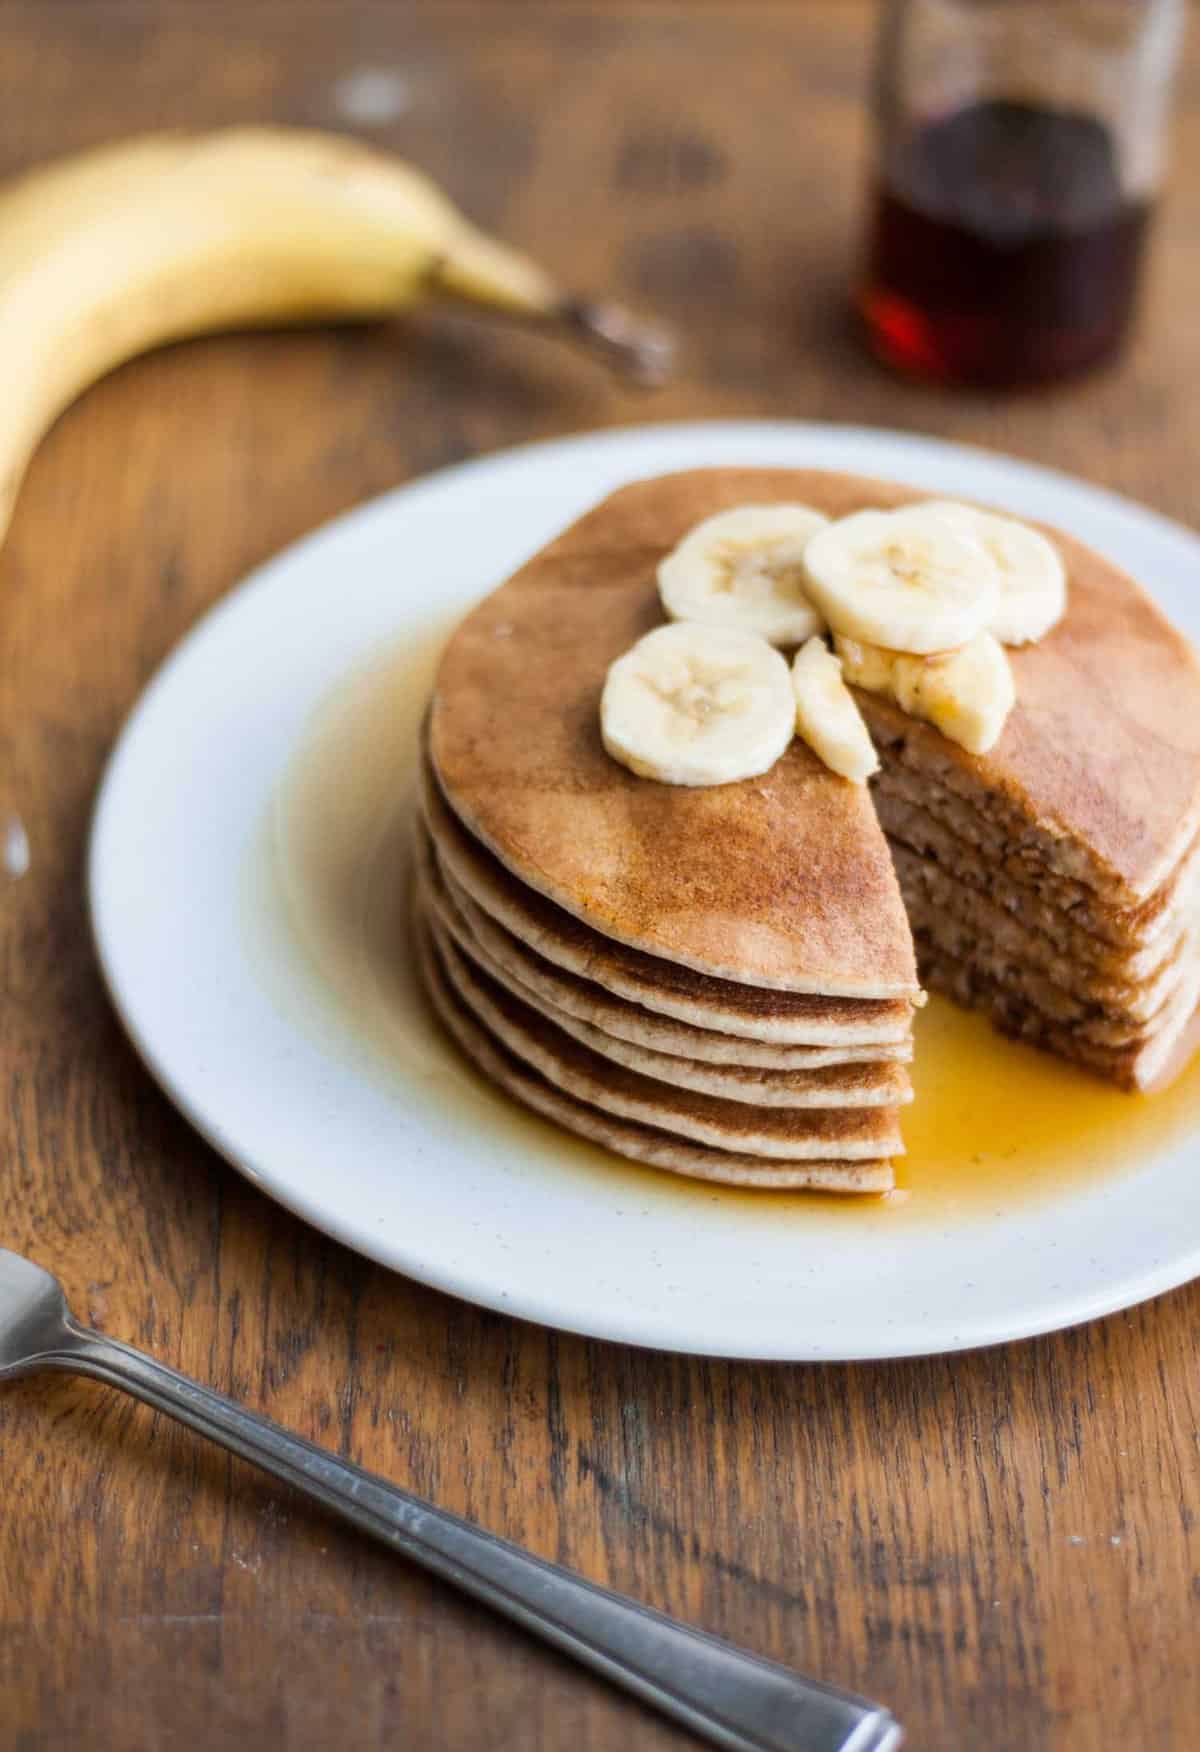 A plate with a stack of pancakes topped with banana slices and a wedge cut.